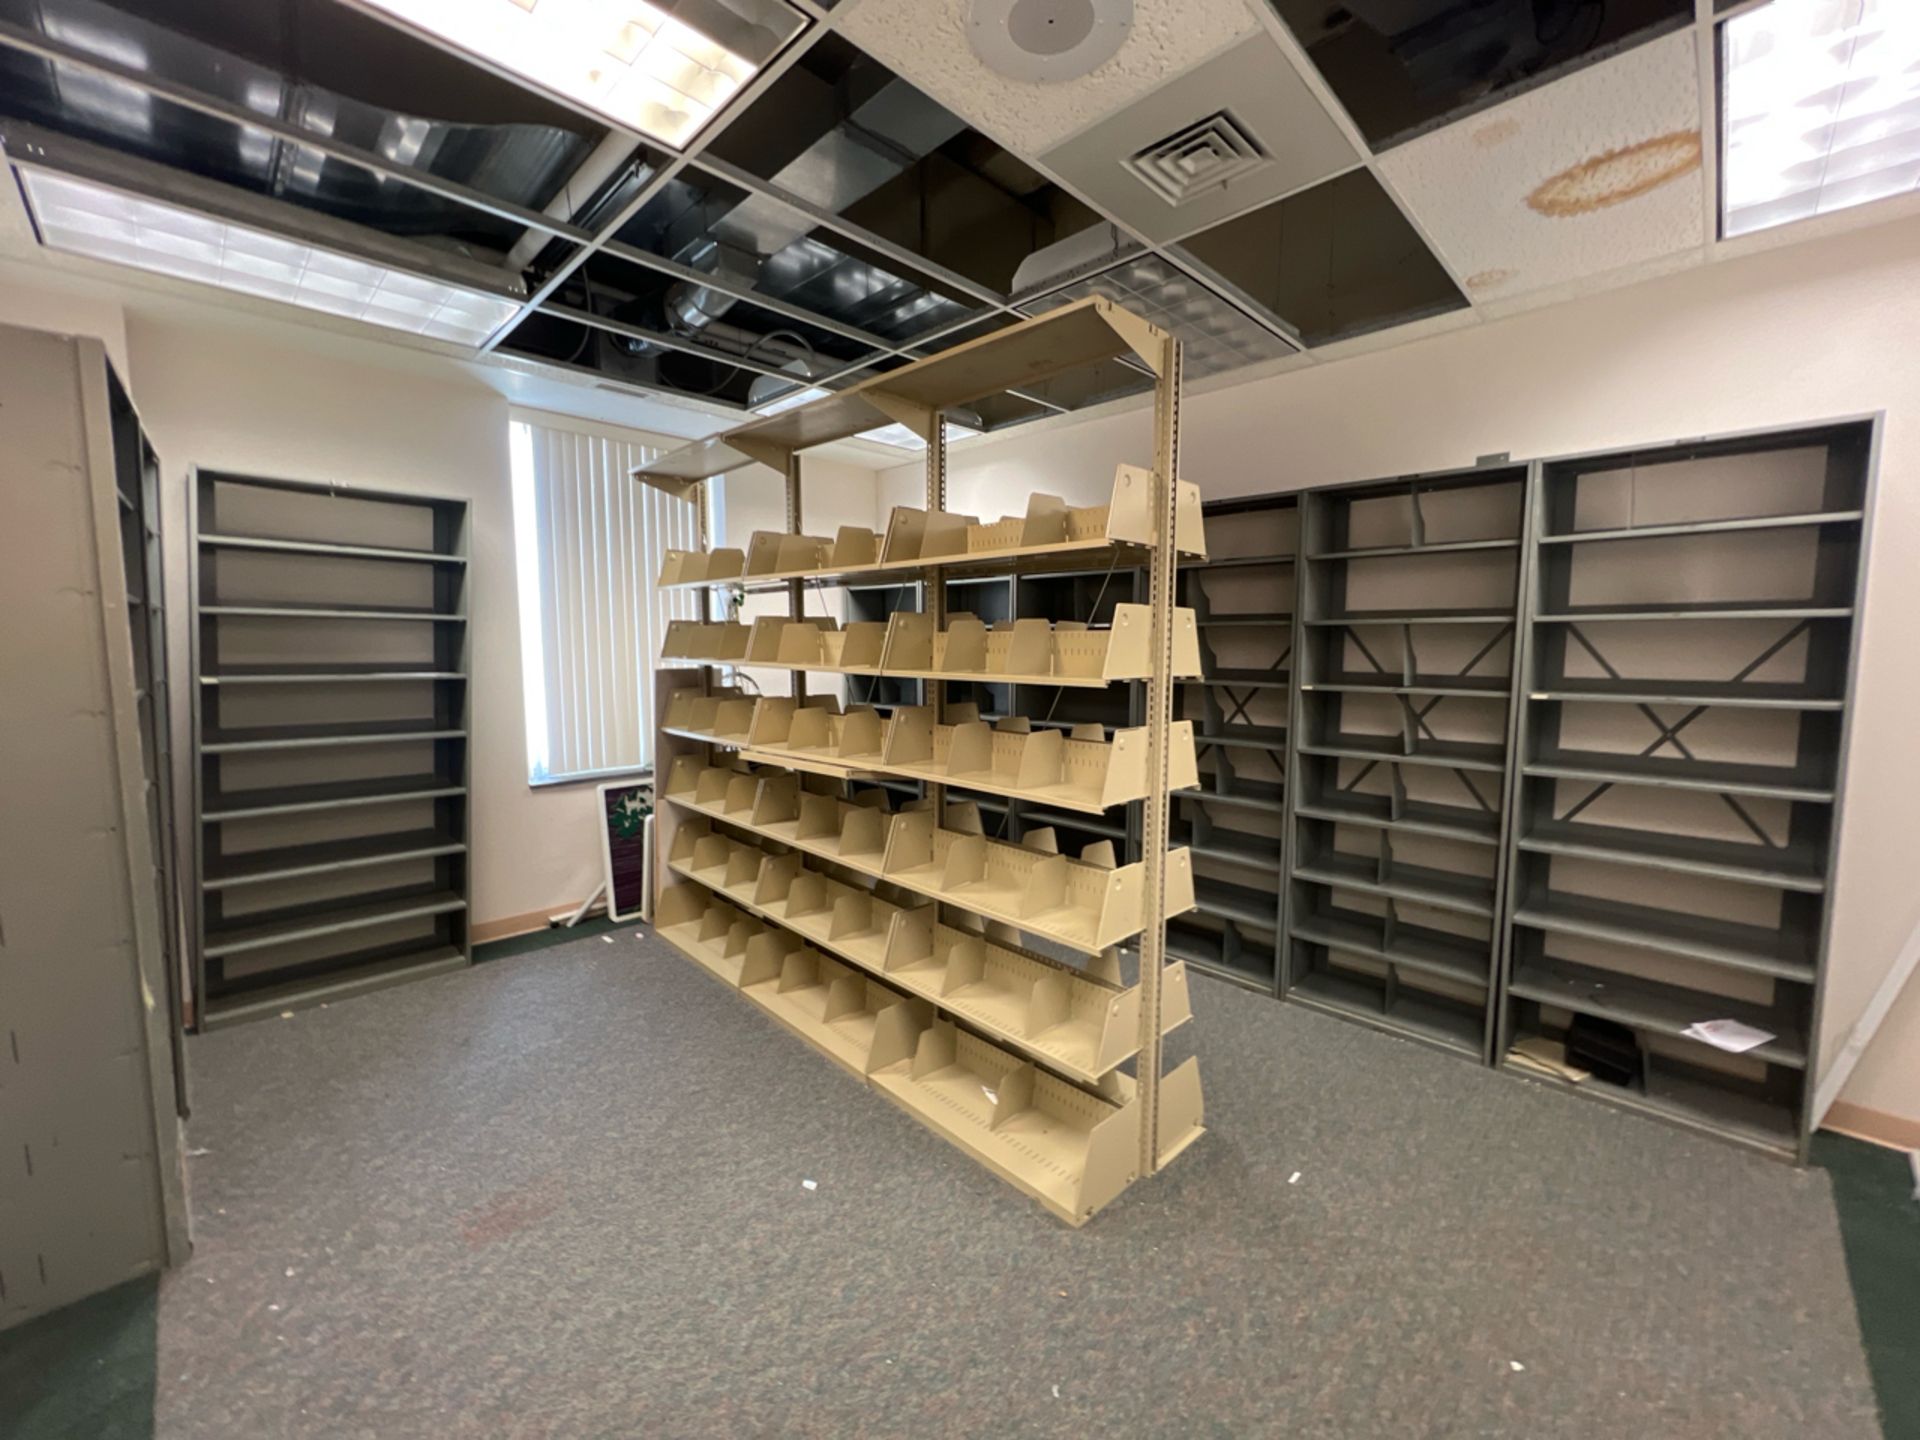 ROOM TO INCLUDE: METAL SHELVING SYSTEMS